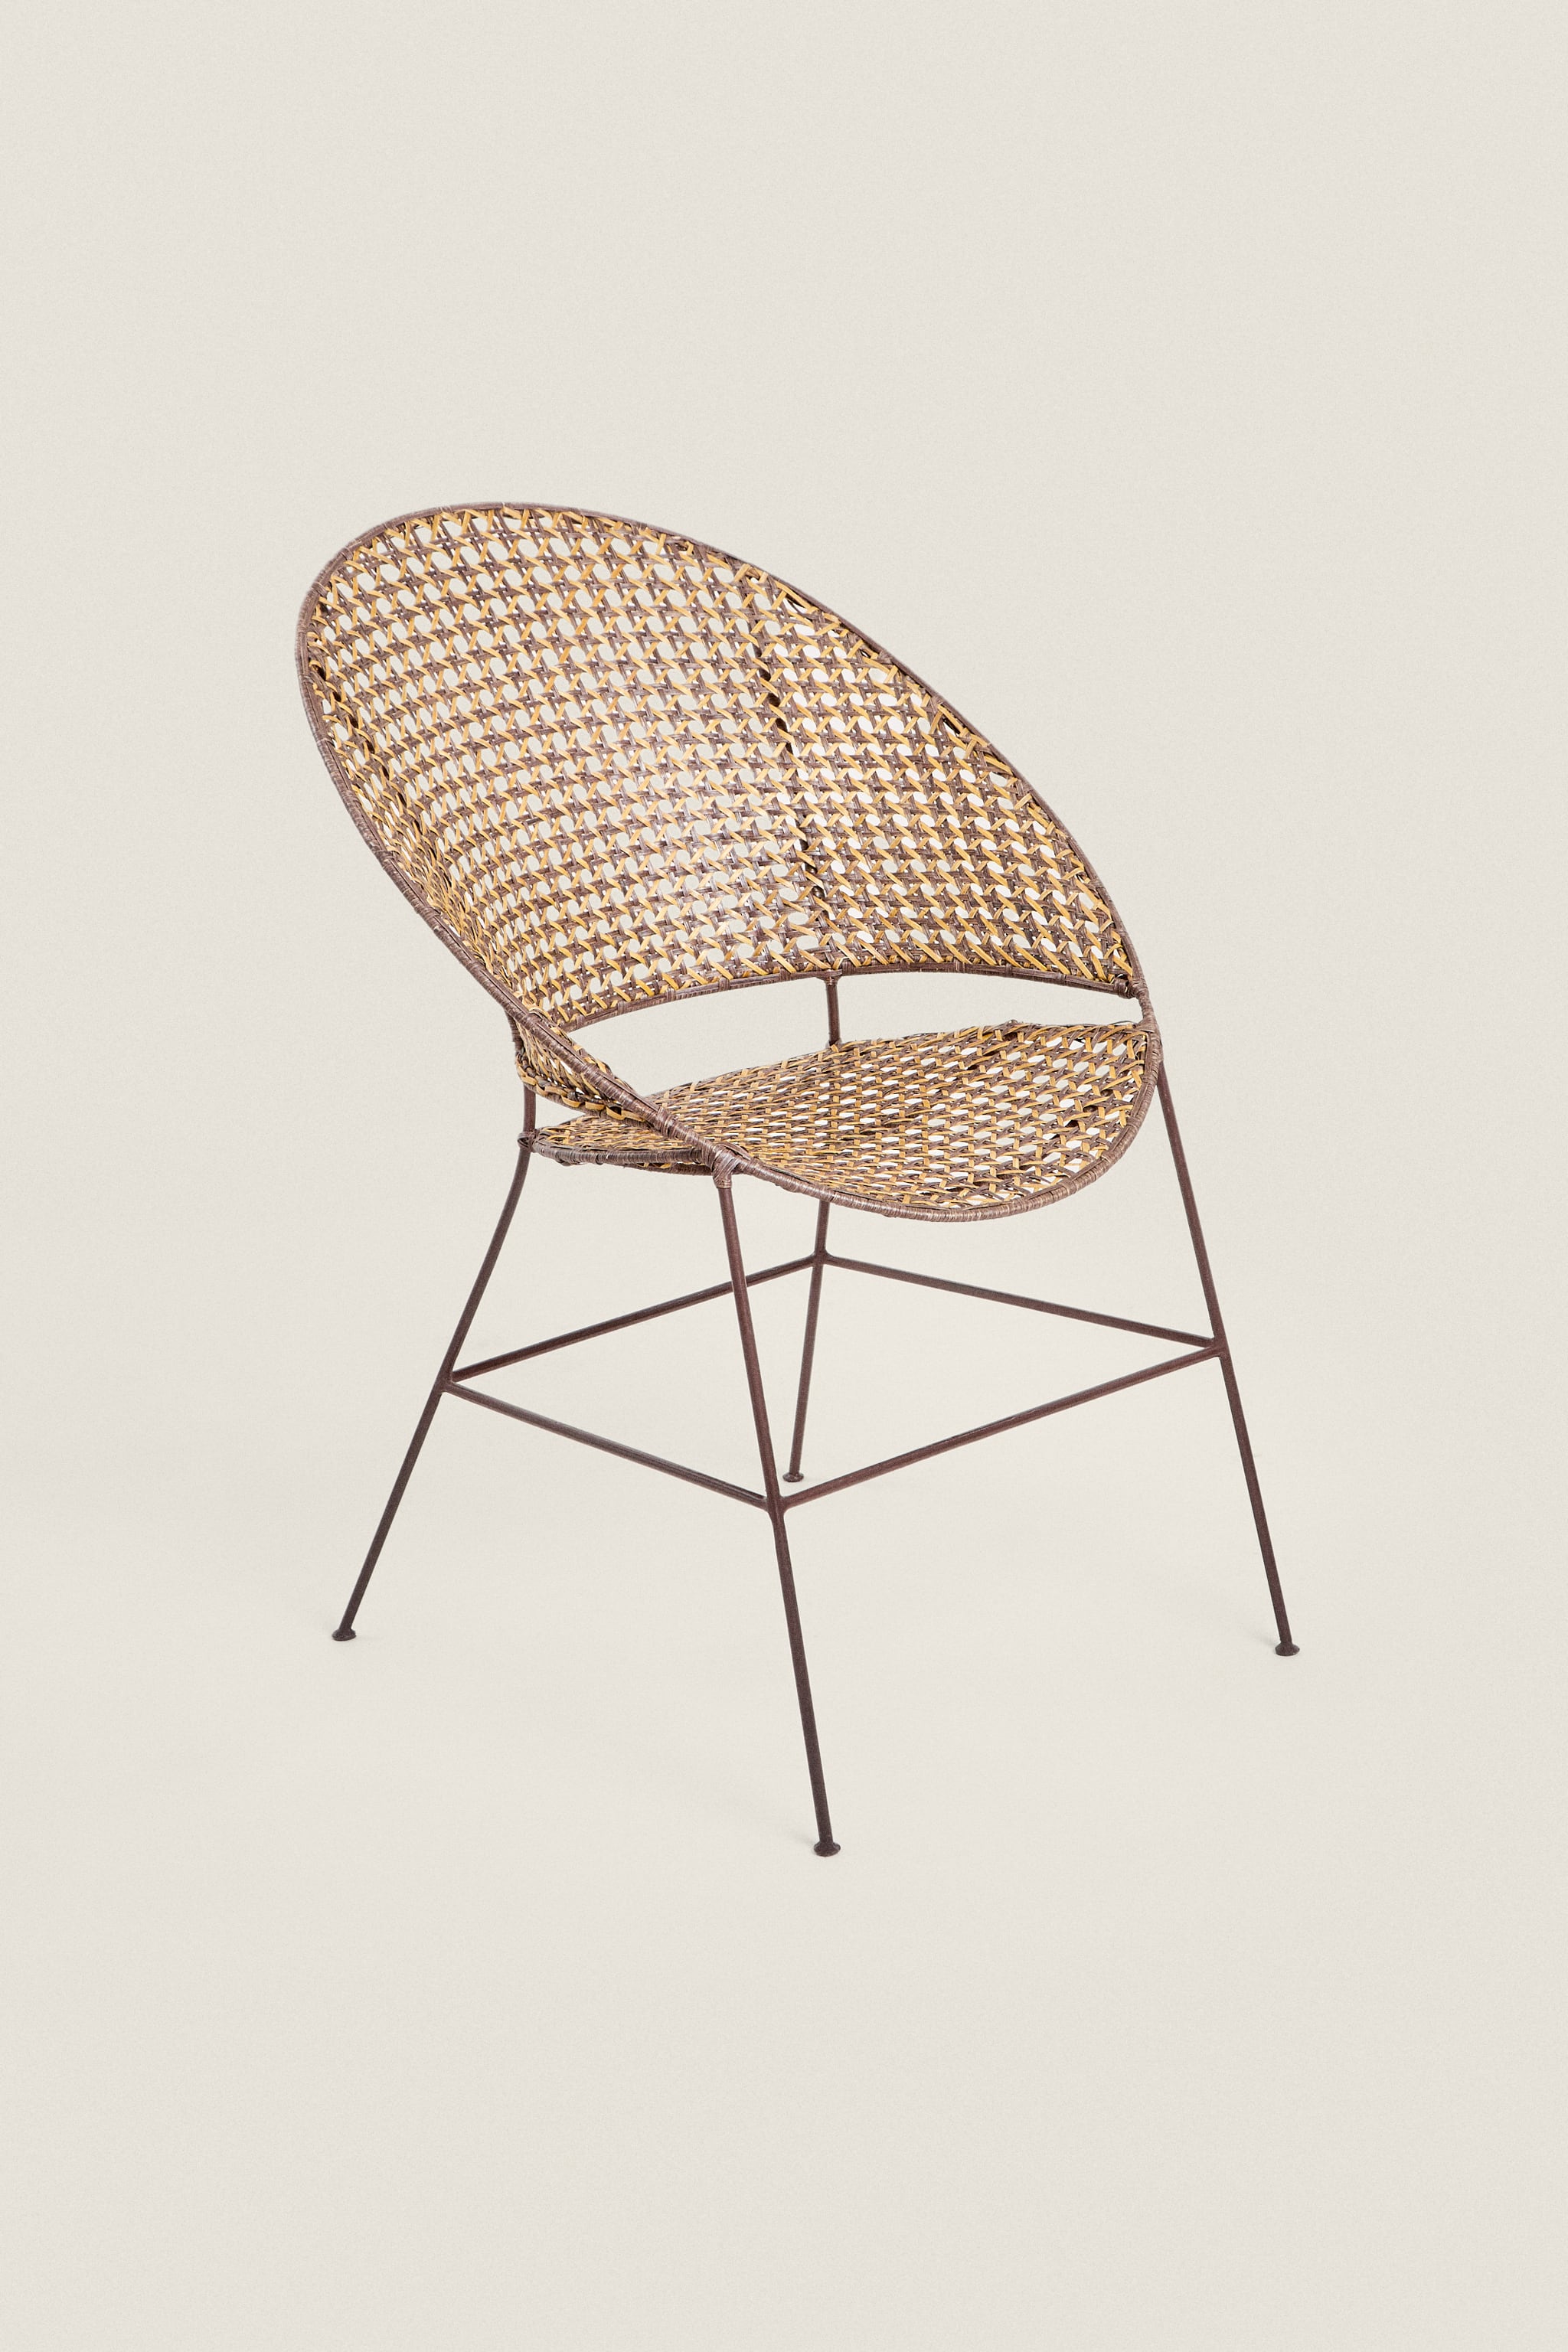 RATTAN CHAIR WITH METAL FRAME